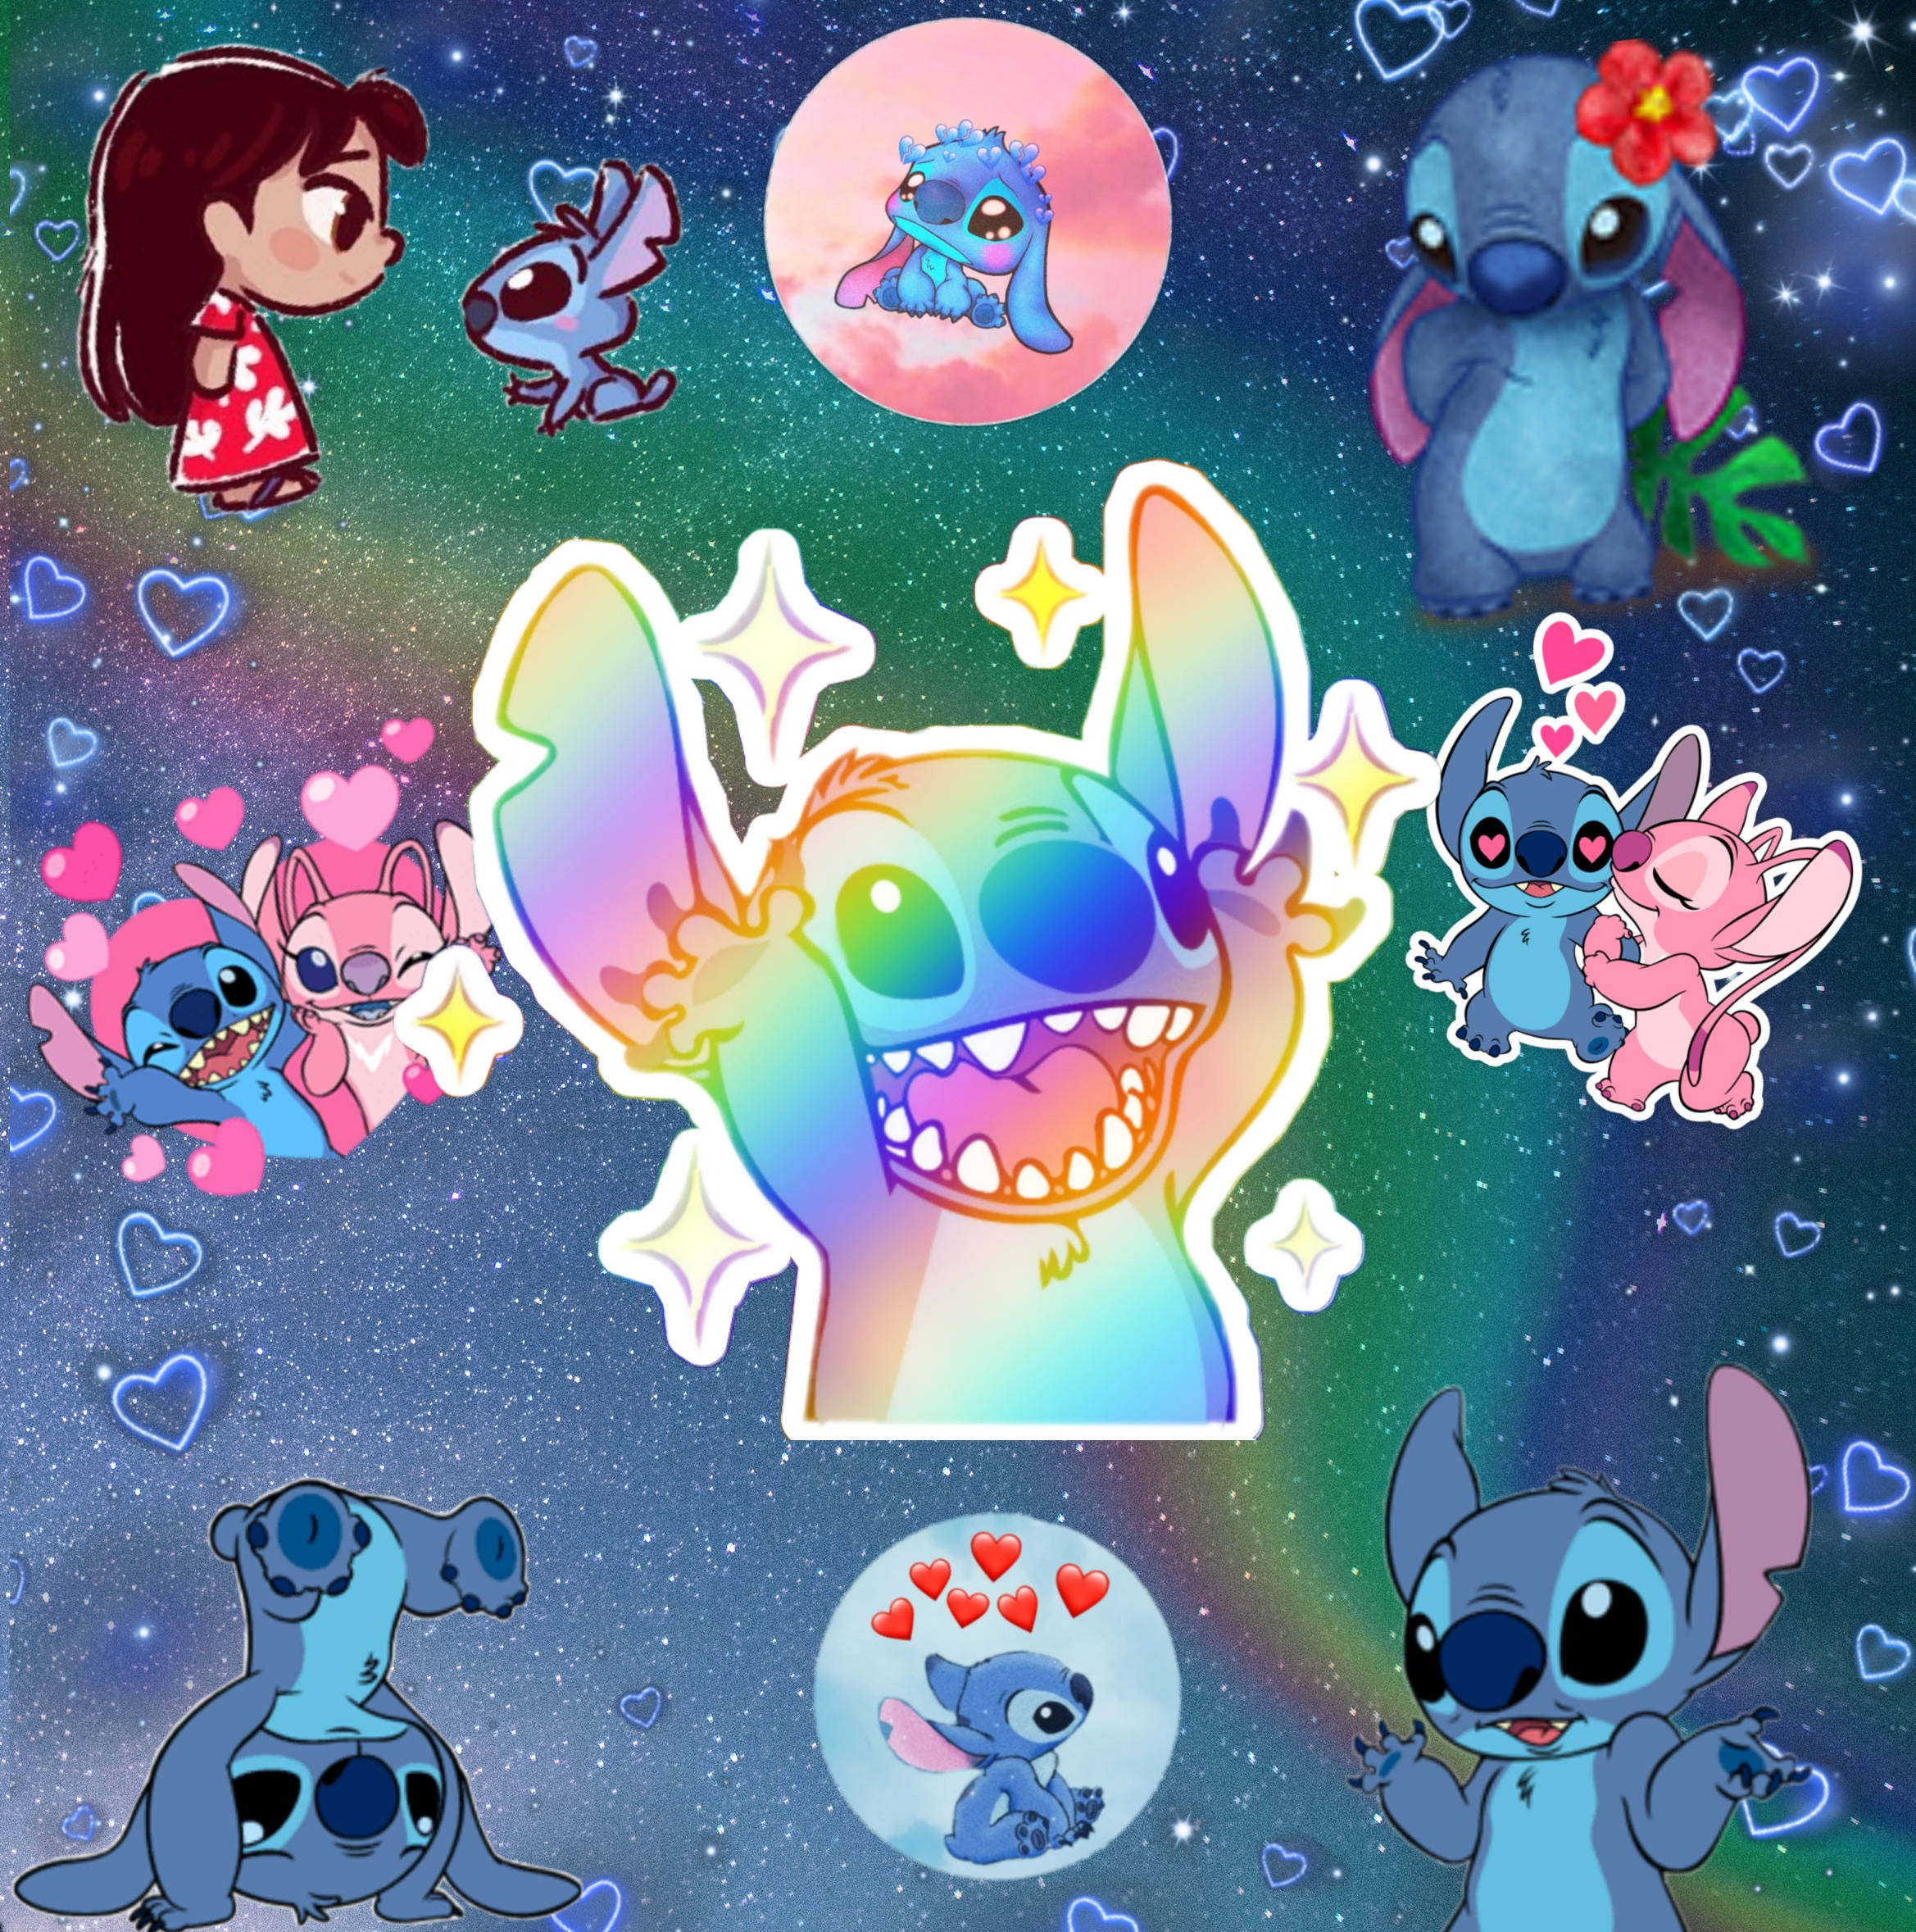 Download Sleepy And Upset Stitch Collage Wallpaper | Wallpapers.com